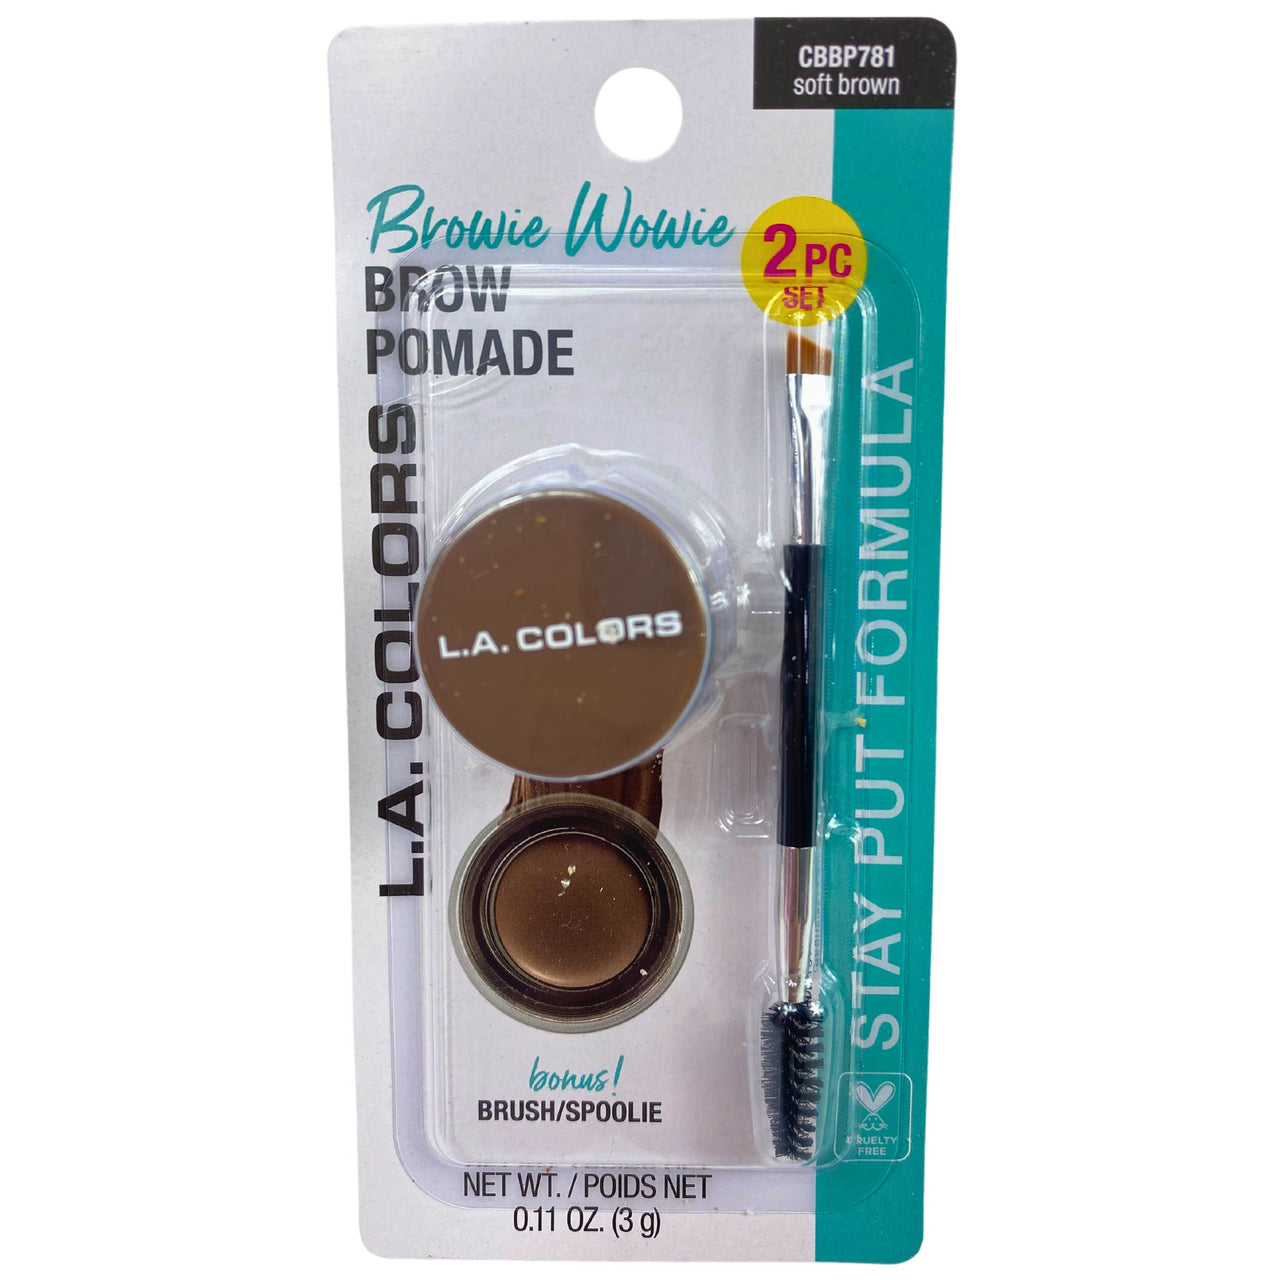 L.A.Girl Brow Pomade Browie Wowie Soft Brown stay Put Formula 